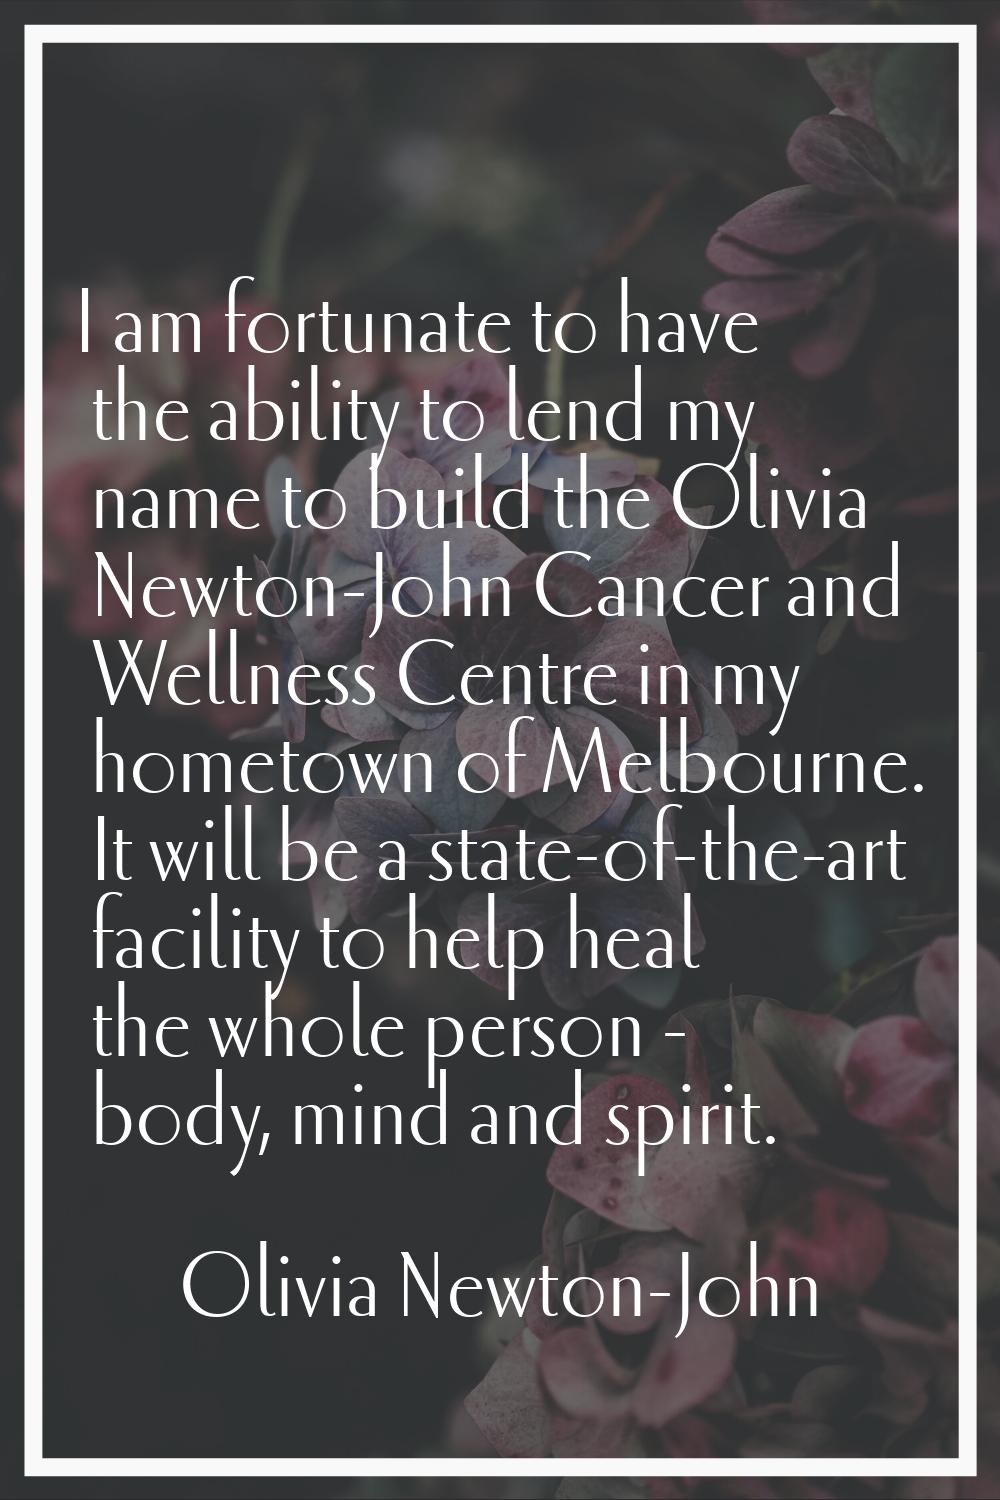 I am fortunate to have the ability to lend my name to build the Olivia Newton-John Cancer and Welln